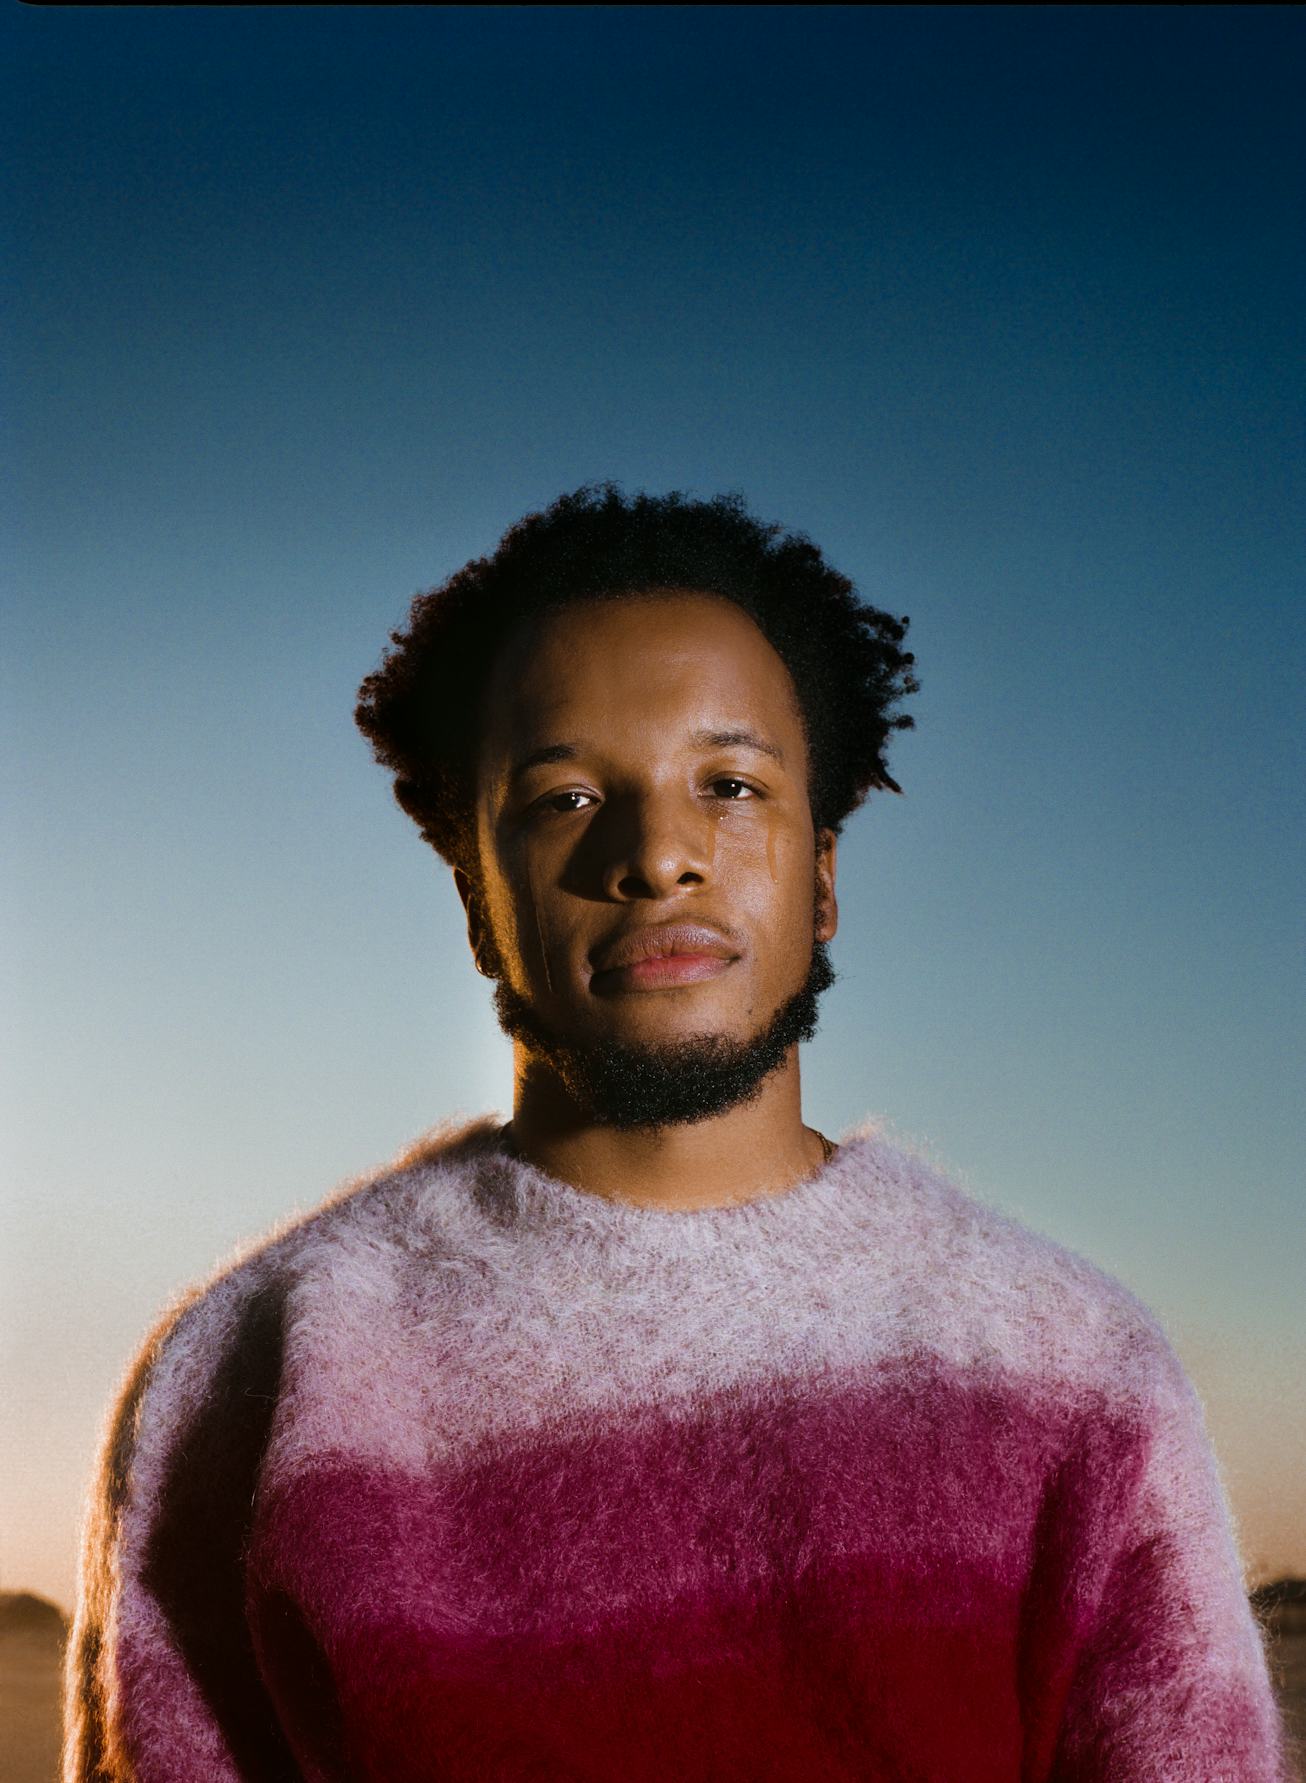 A portrait of Cautious Clay. He's in a pink sweater and standing against an ombre sunset sky.